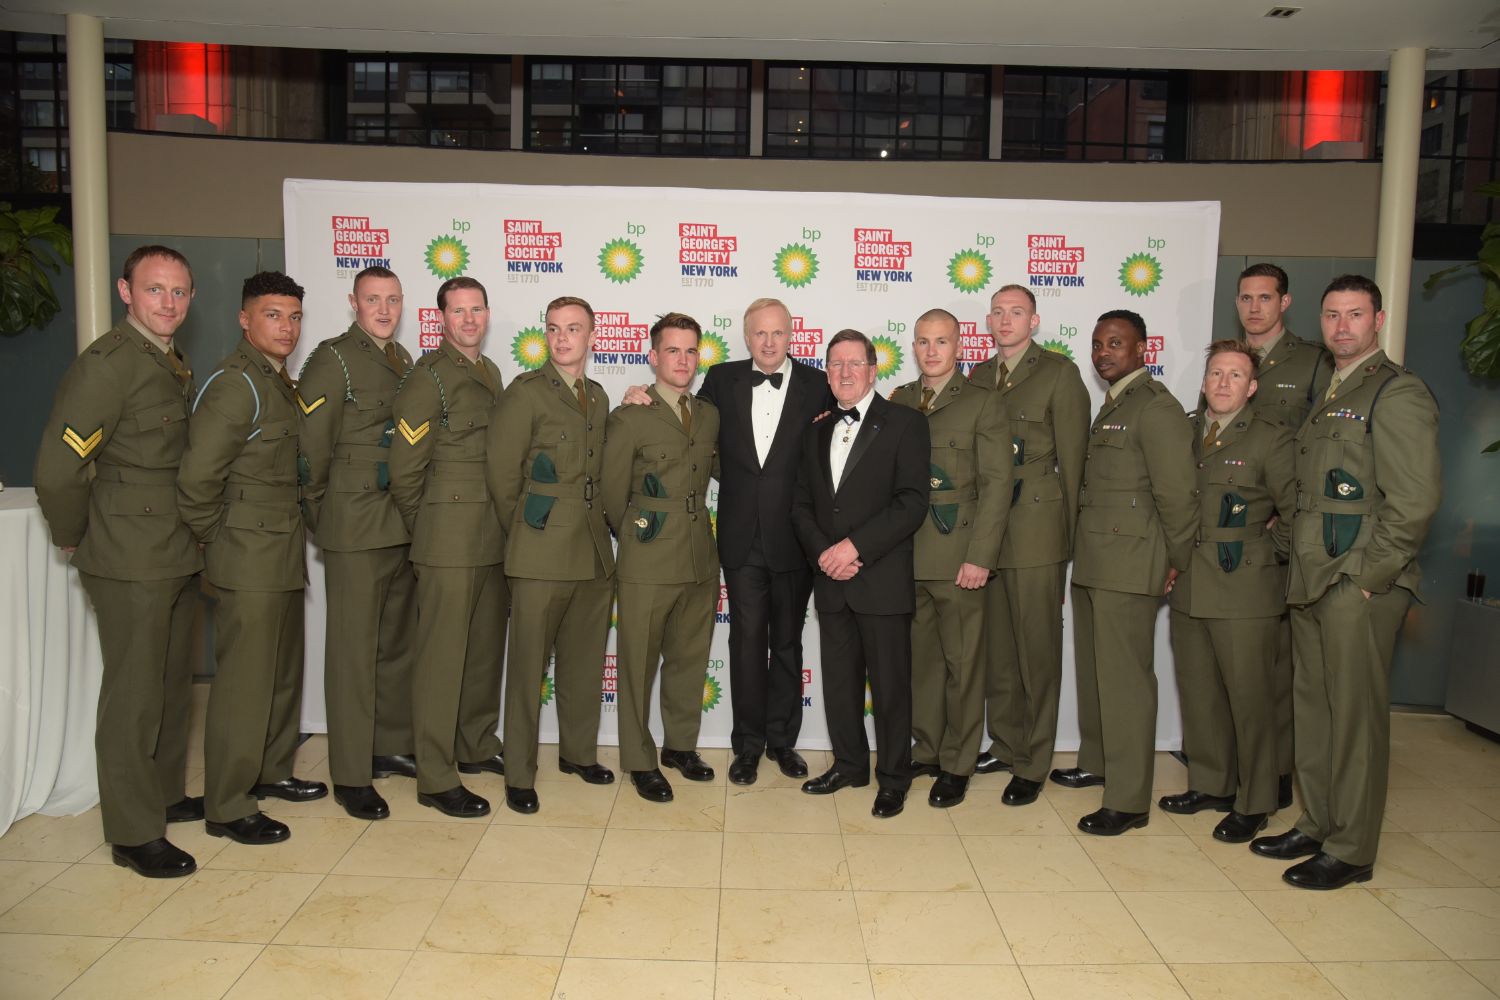  Bob Dudley and the Rt Hon Lord George Robertson pictured with the Royal Marines 